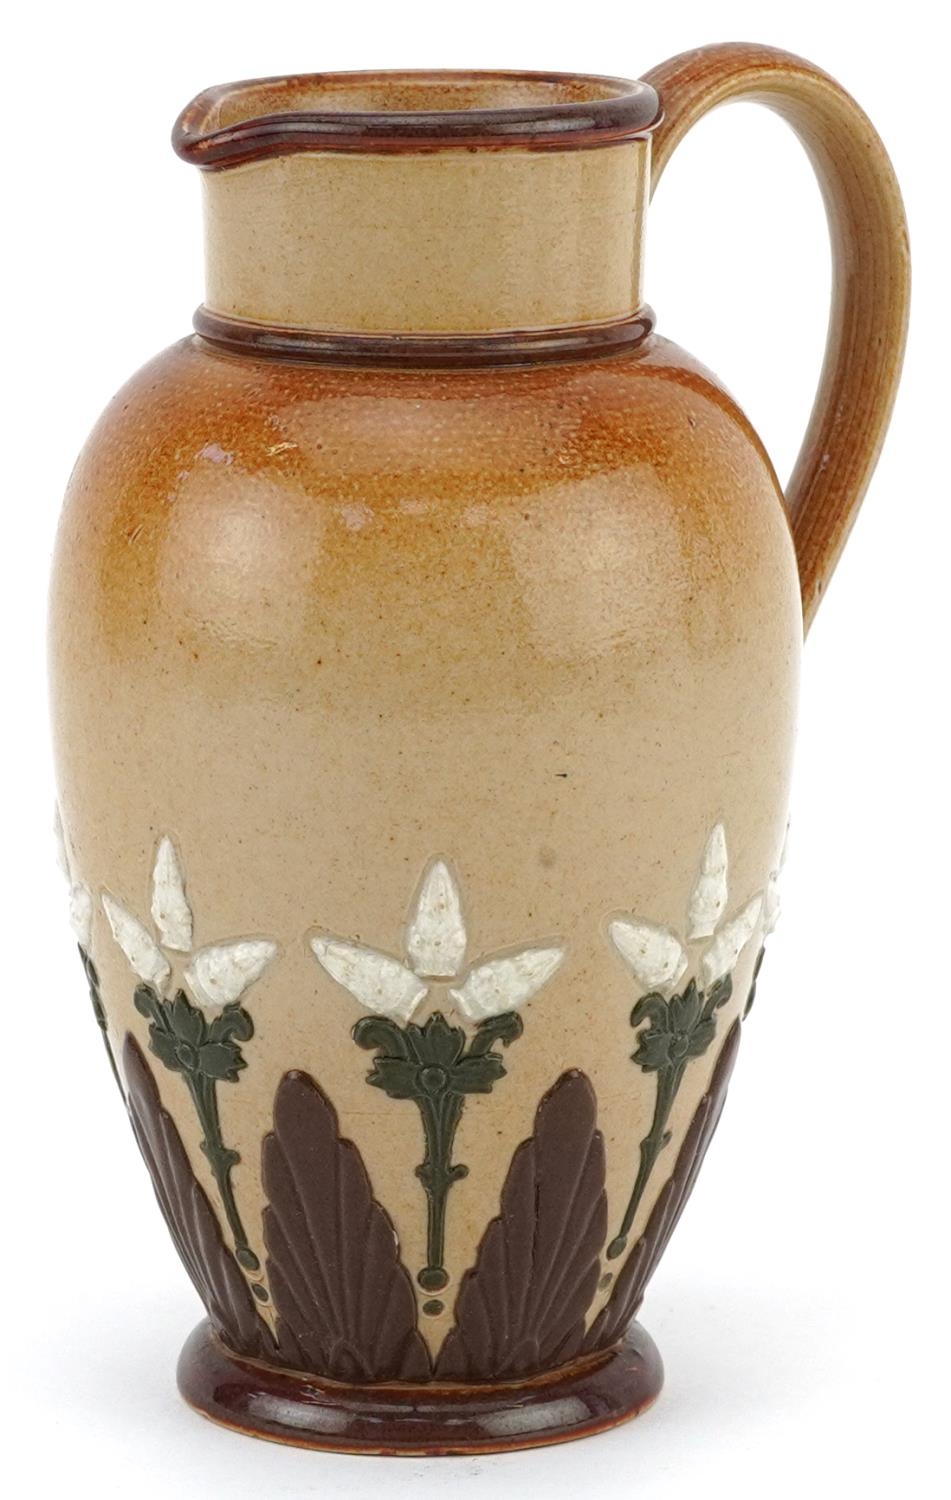 Doulton Lambeth, Art Nouveau Royal Doulton stoneware jug hand painted and incised with stylised